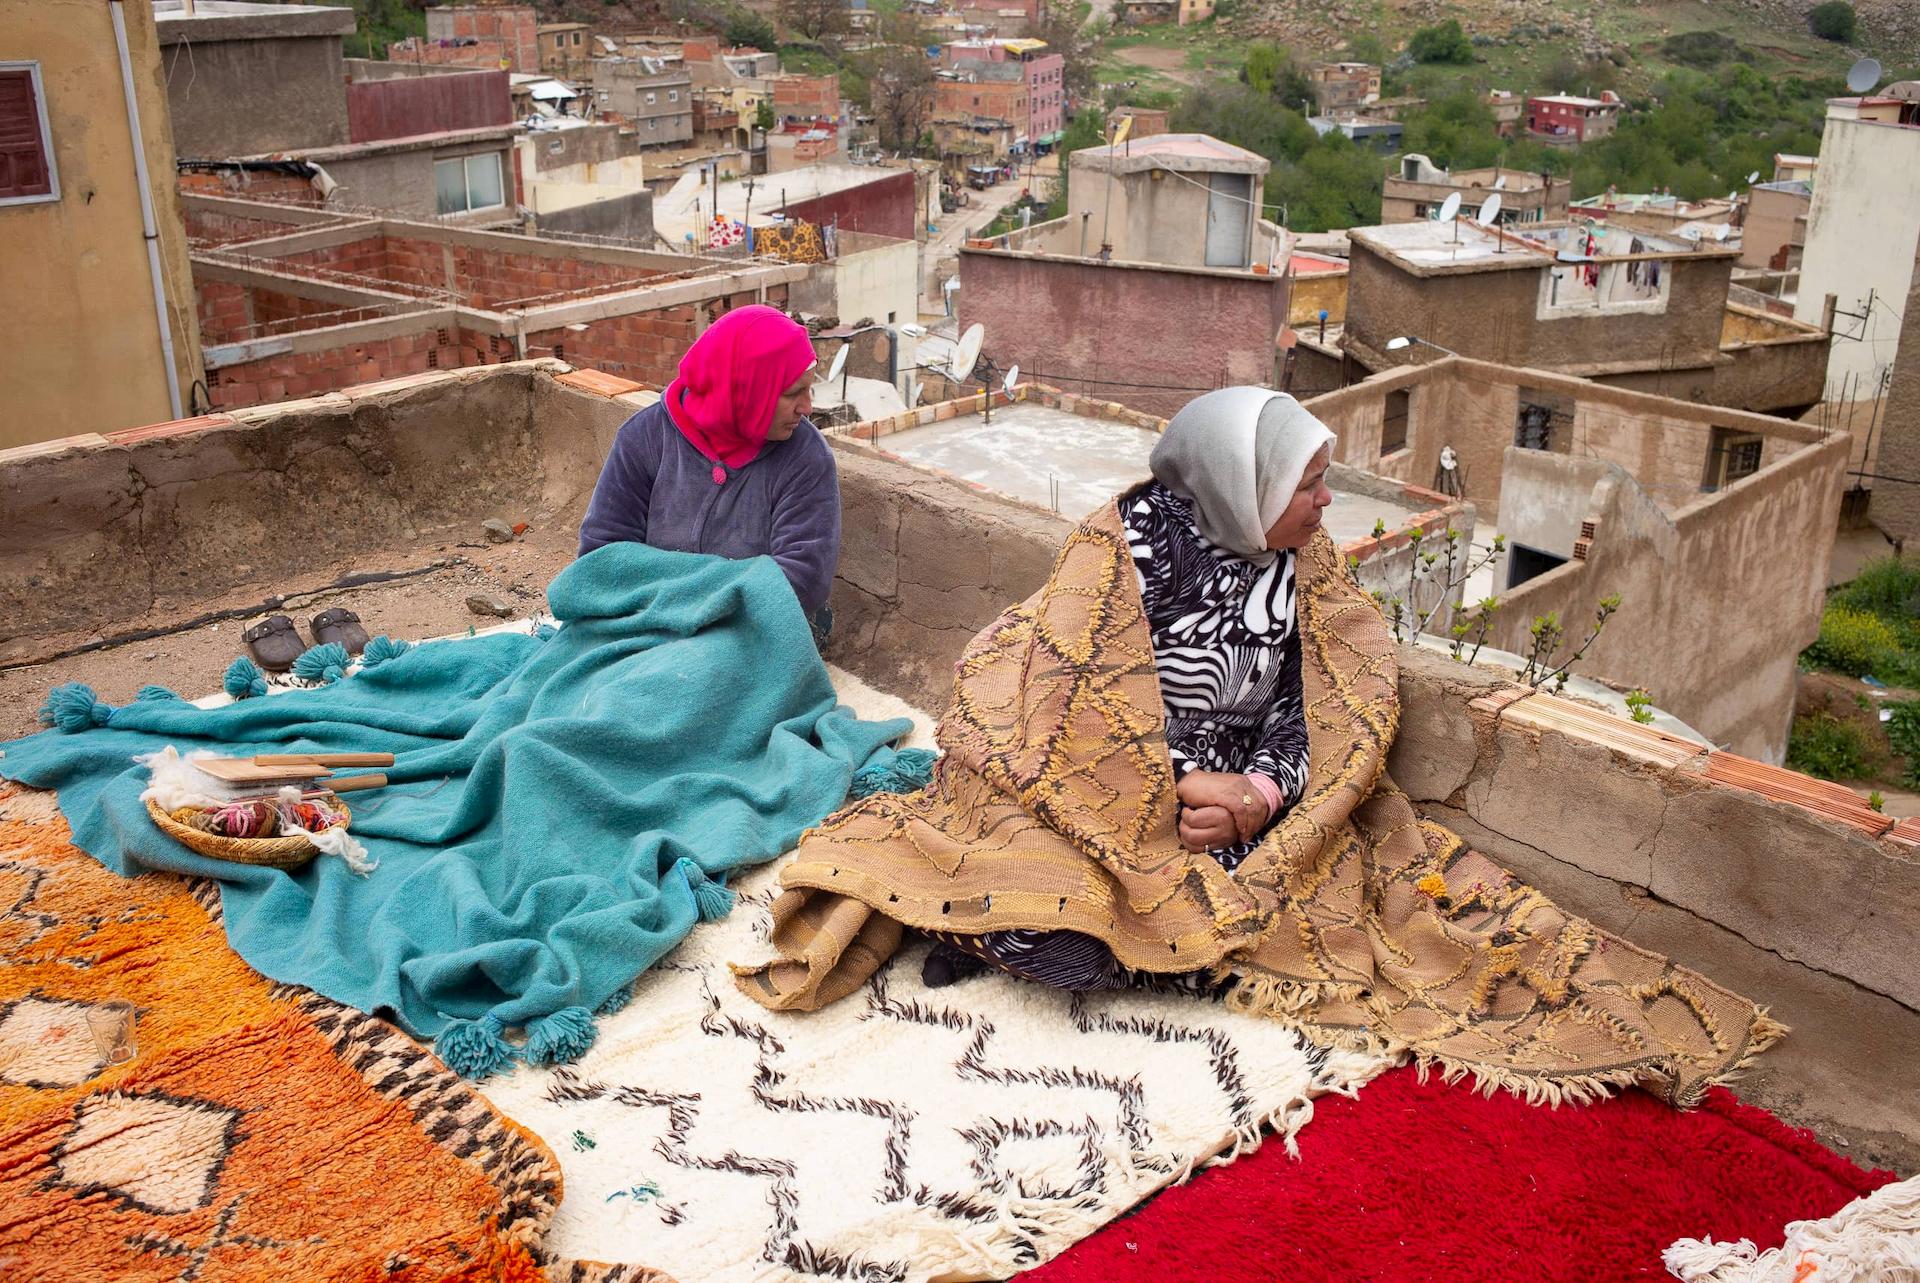 /img/pages/atlas-weavers/1/Weavers_Hashmia_Douiri_and_Hjou_Amraoui_sitting_on_the_rooftop_of_the_cooperative.jpg